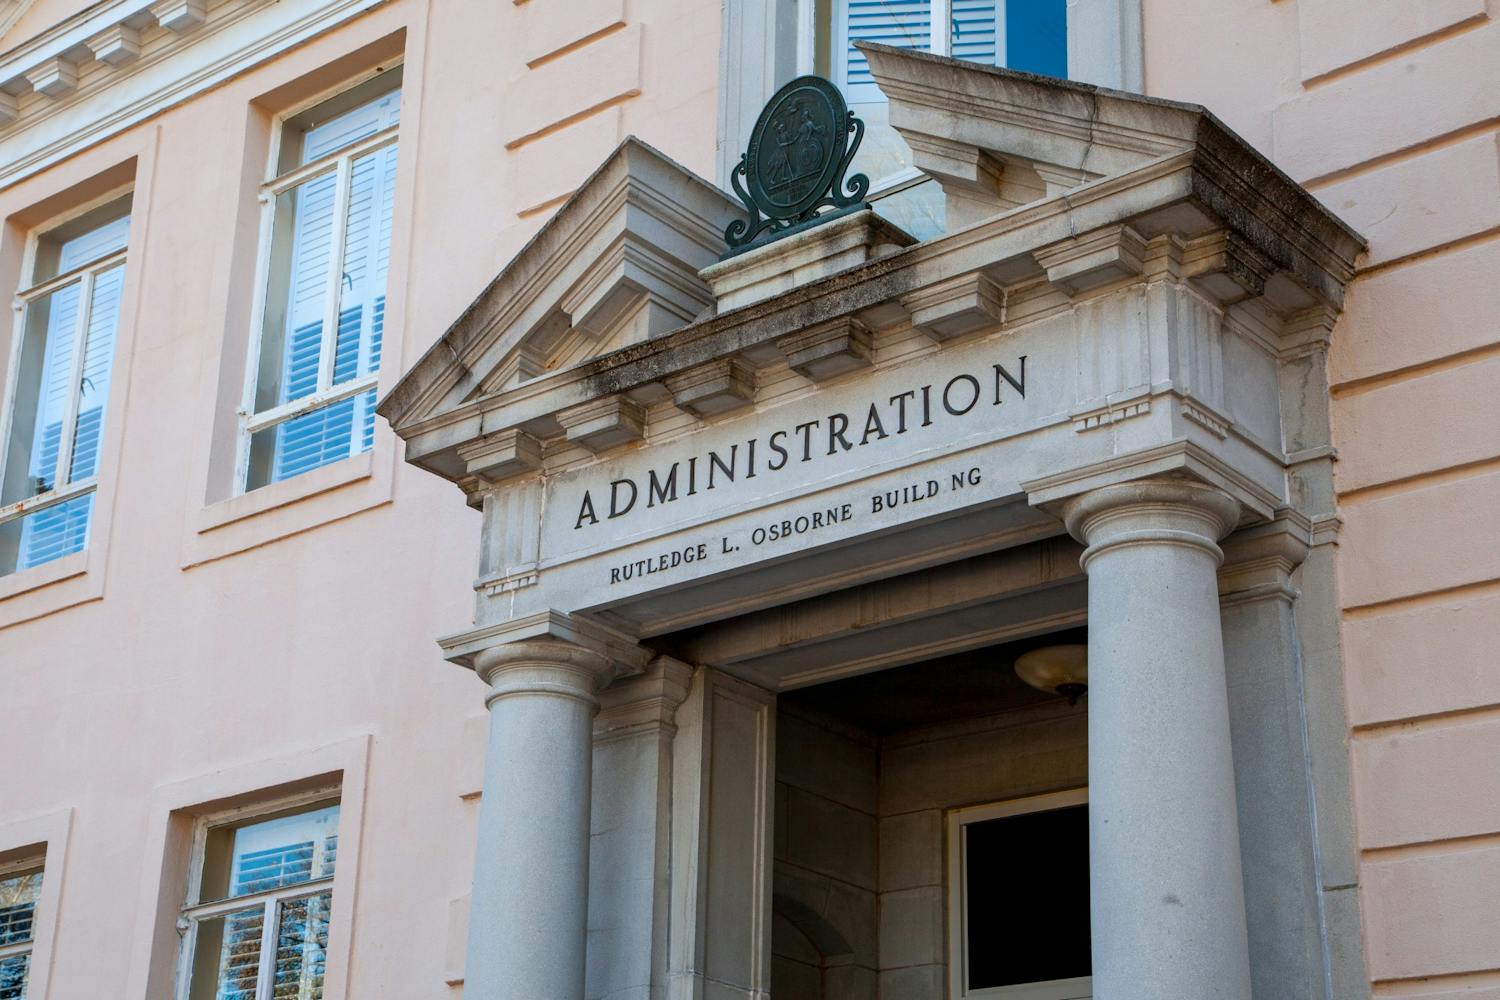 The Osborne Administration Building in Columbia, ɫɫƵ, on March 1, 2022. The building houses administrative offices for the University of South Carolina.